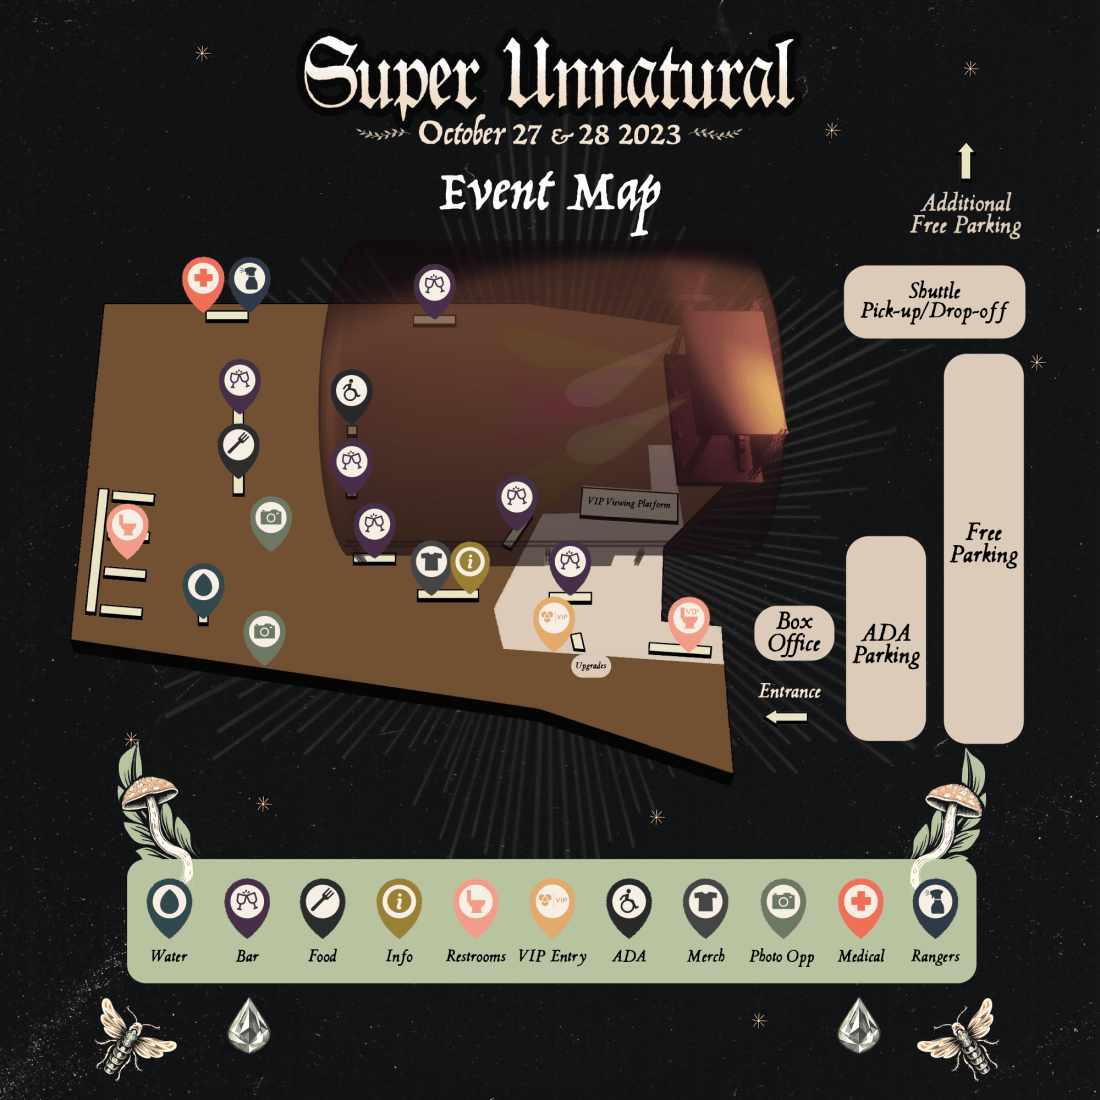 Your Complete Guide to Super Unnatural